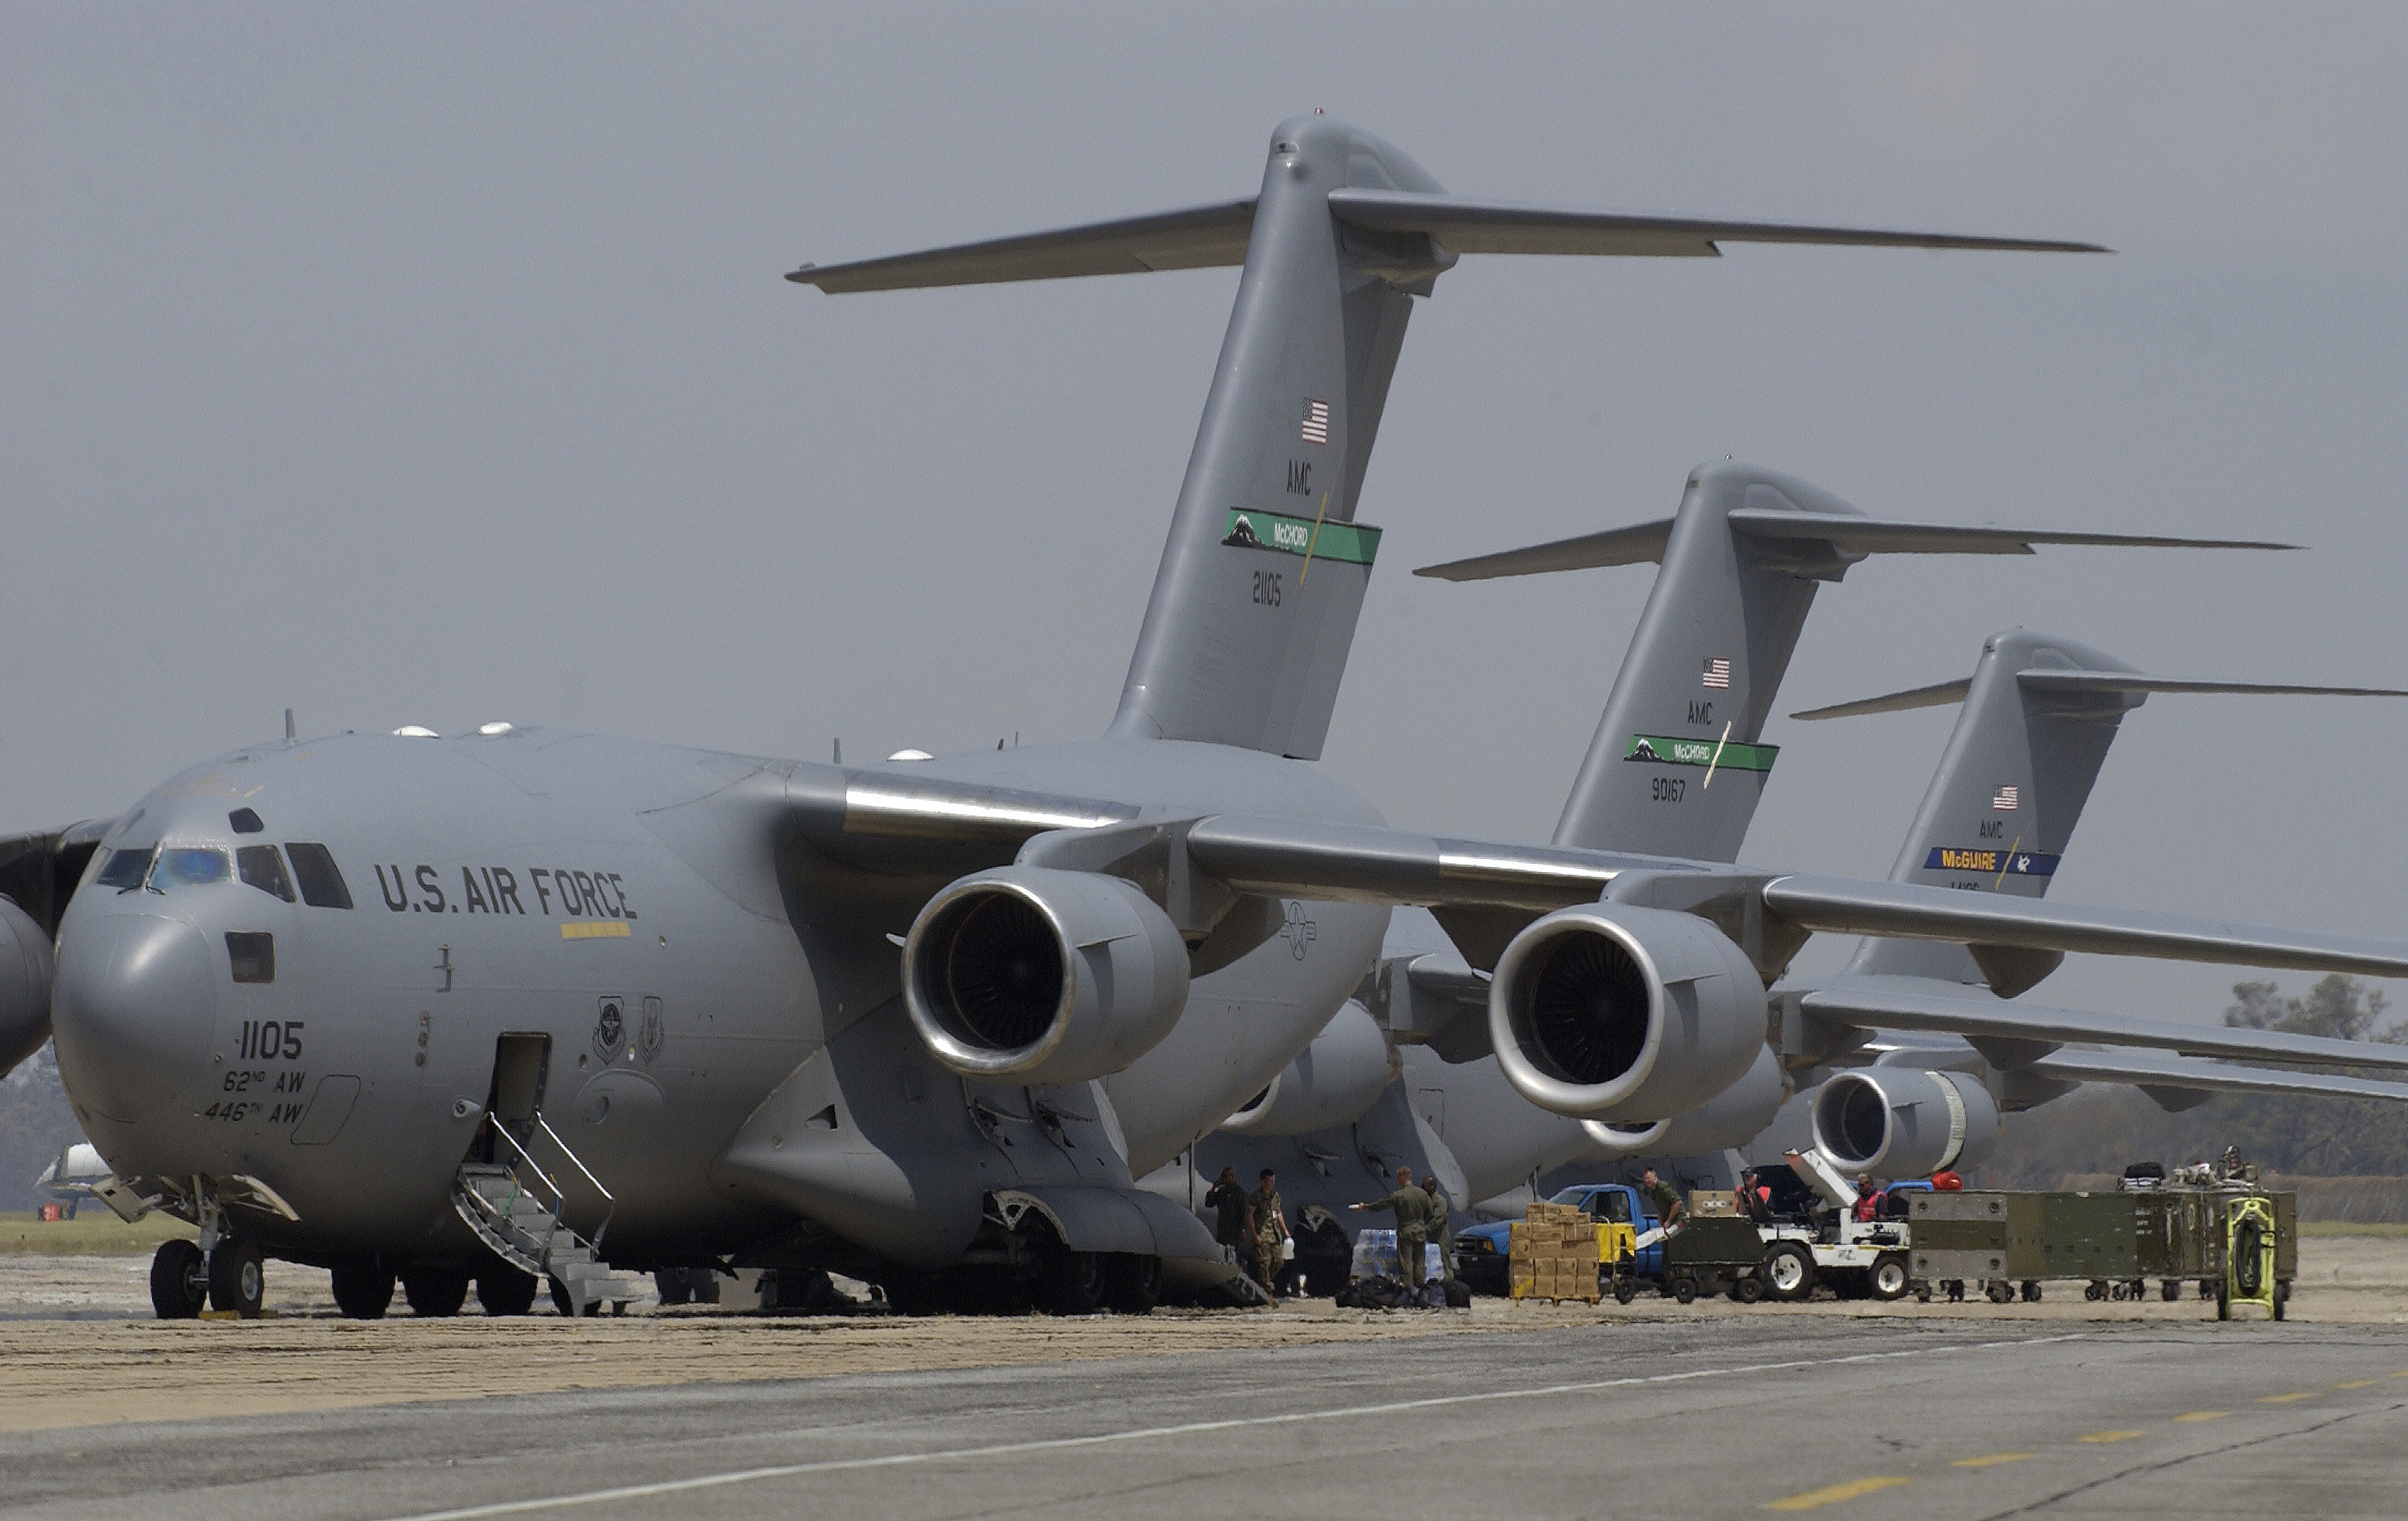 Three U.S. Air Force C-17 Globemaster III aircraft offload tons of equipment in Mississippi on Aug. 31, 2015. US Air Force Photo